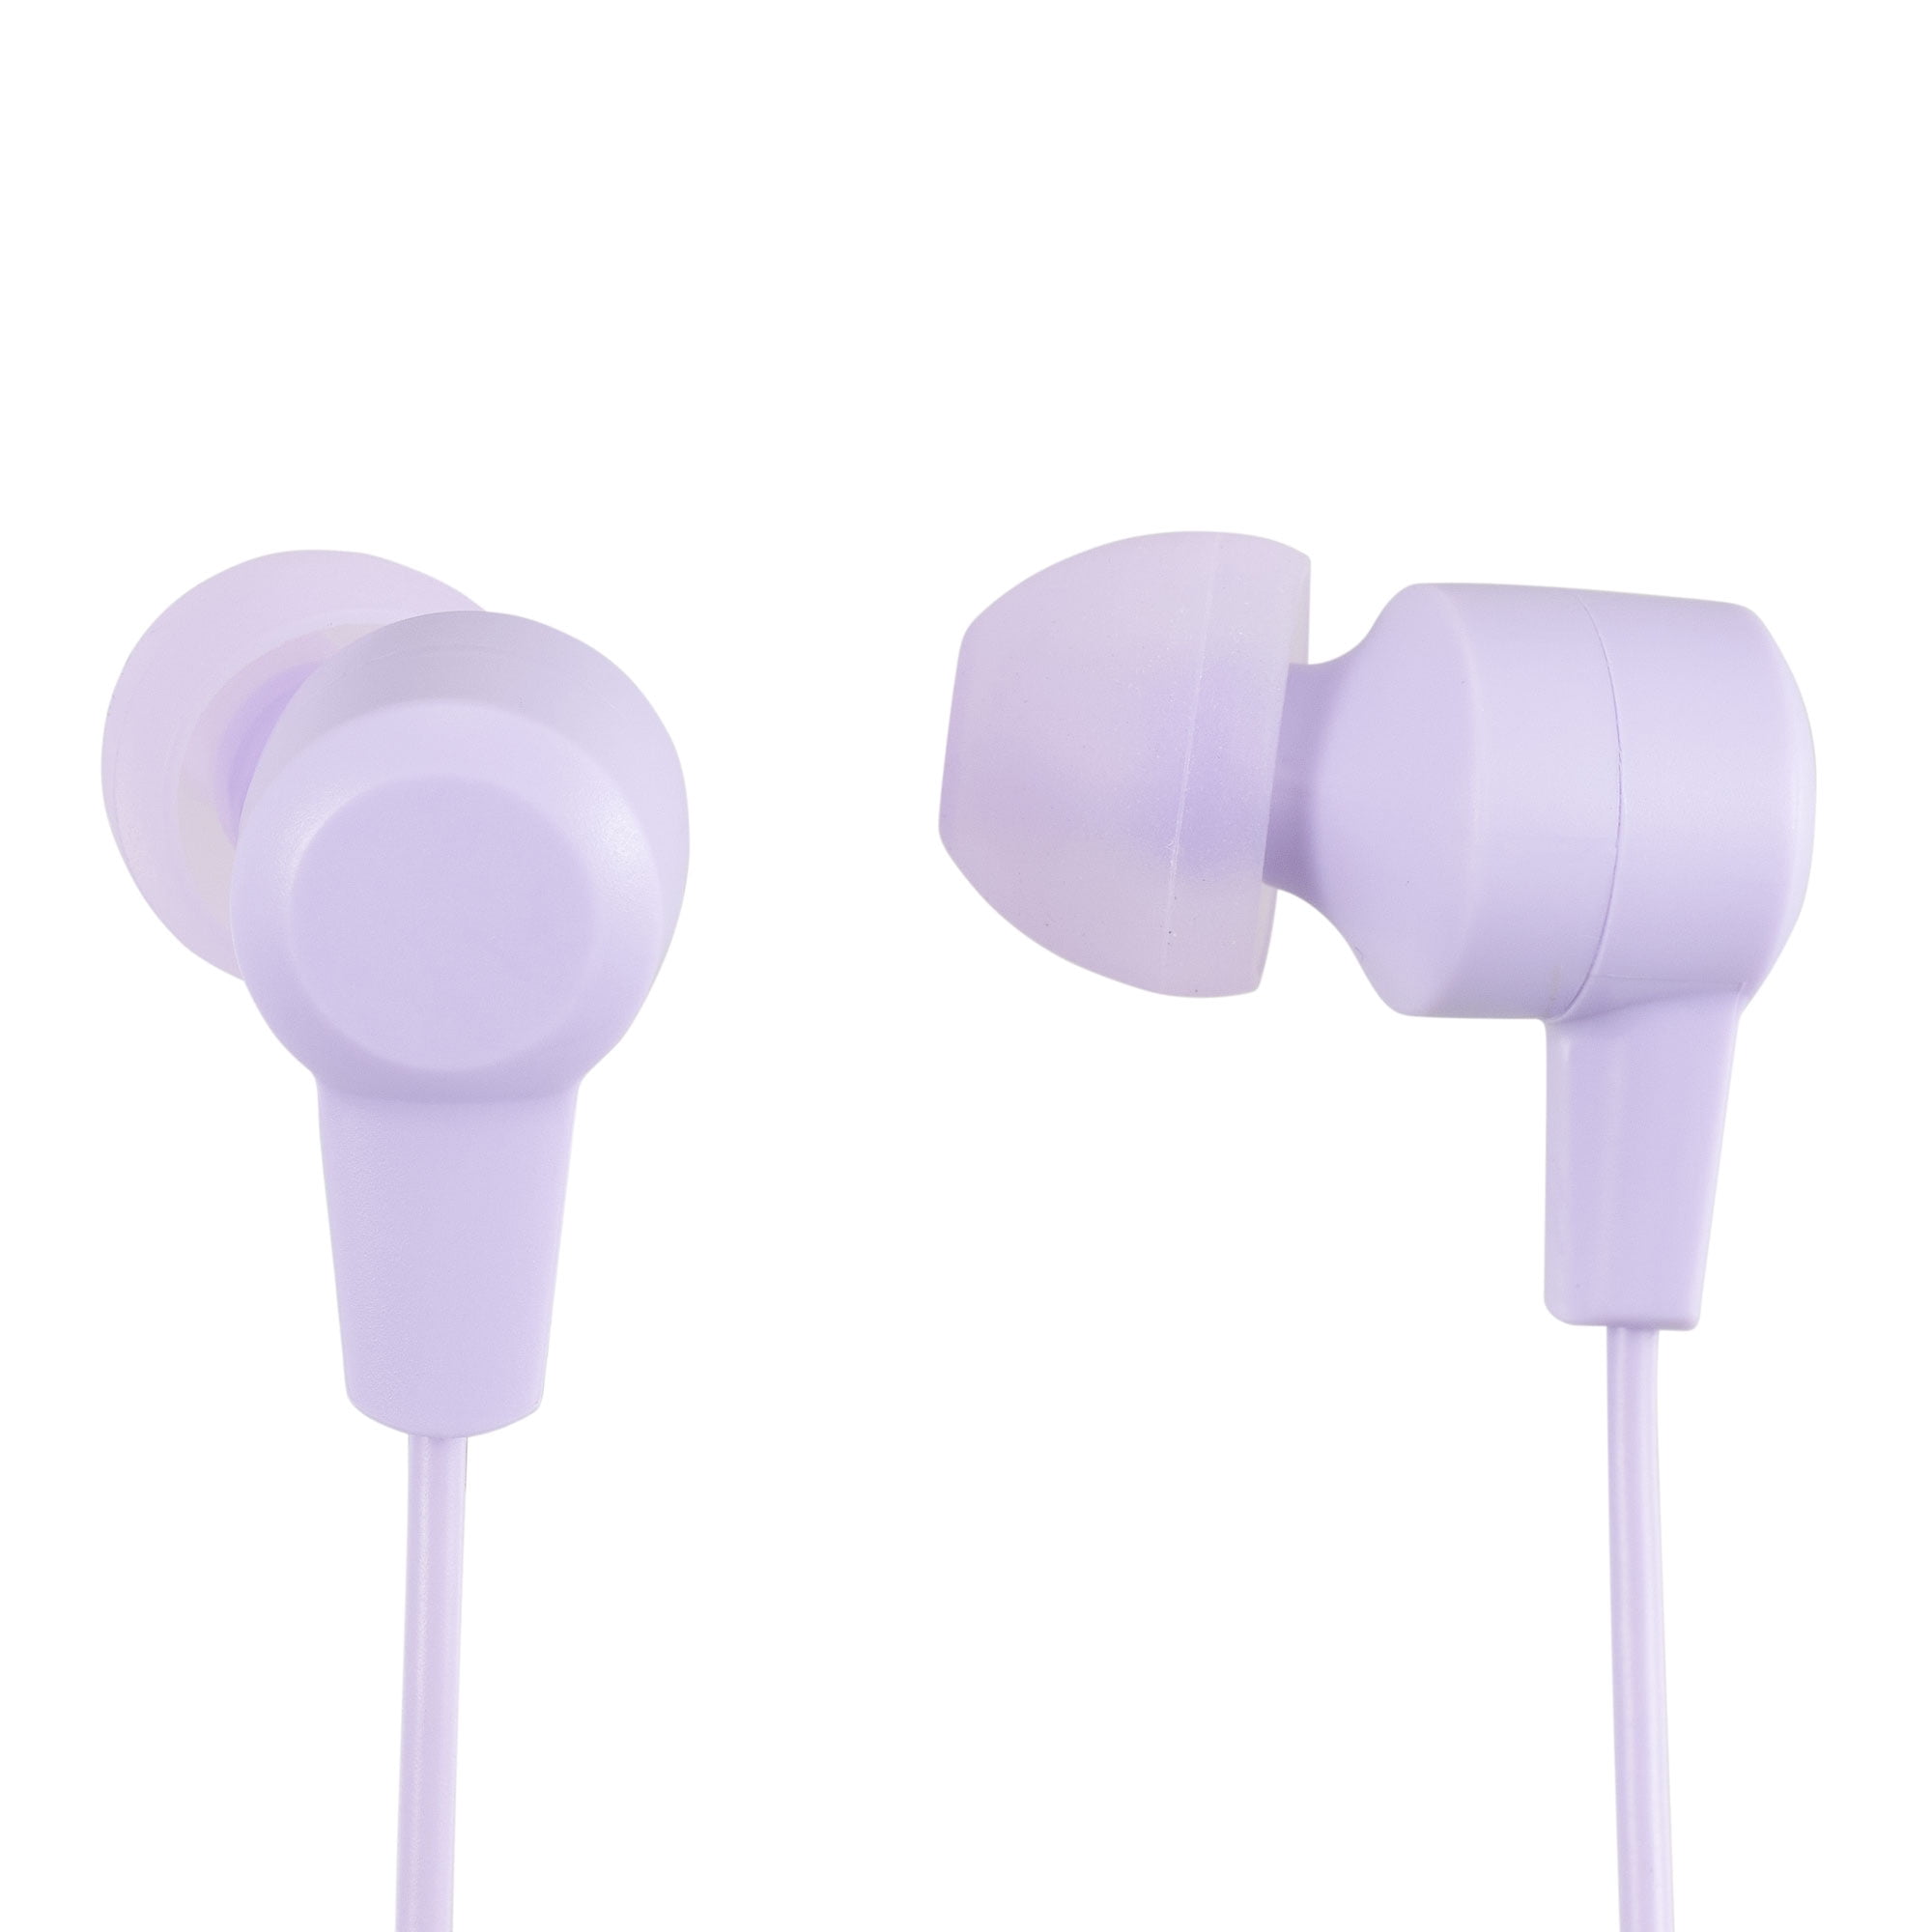 onn. Wired Earphones with Mic-3.5mm jack, Lilac